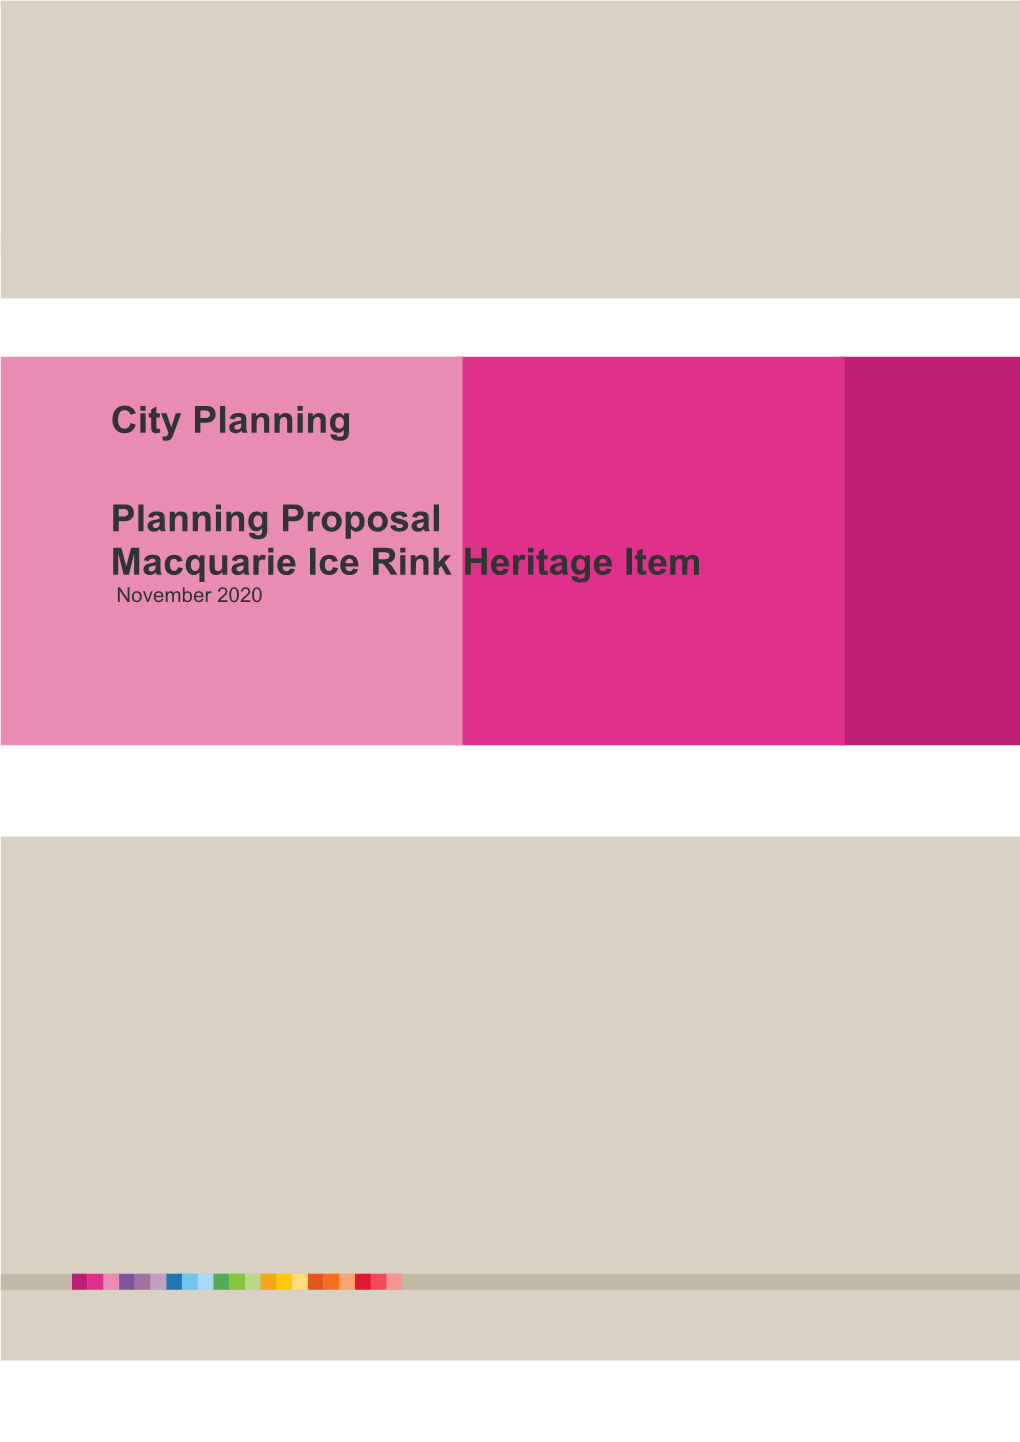 City Planning Planning Proposal Macquarie Ice Rink Heritage Item